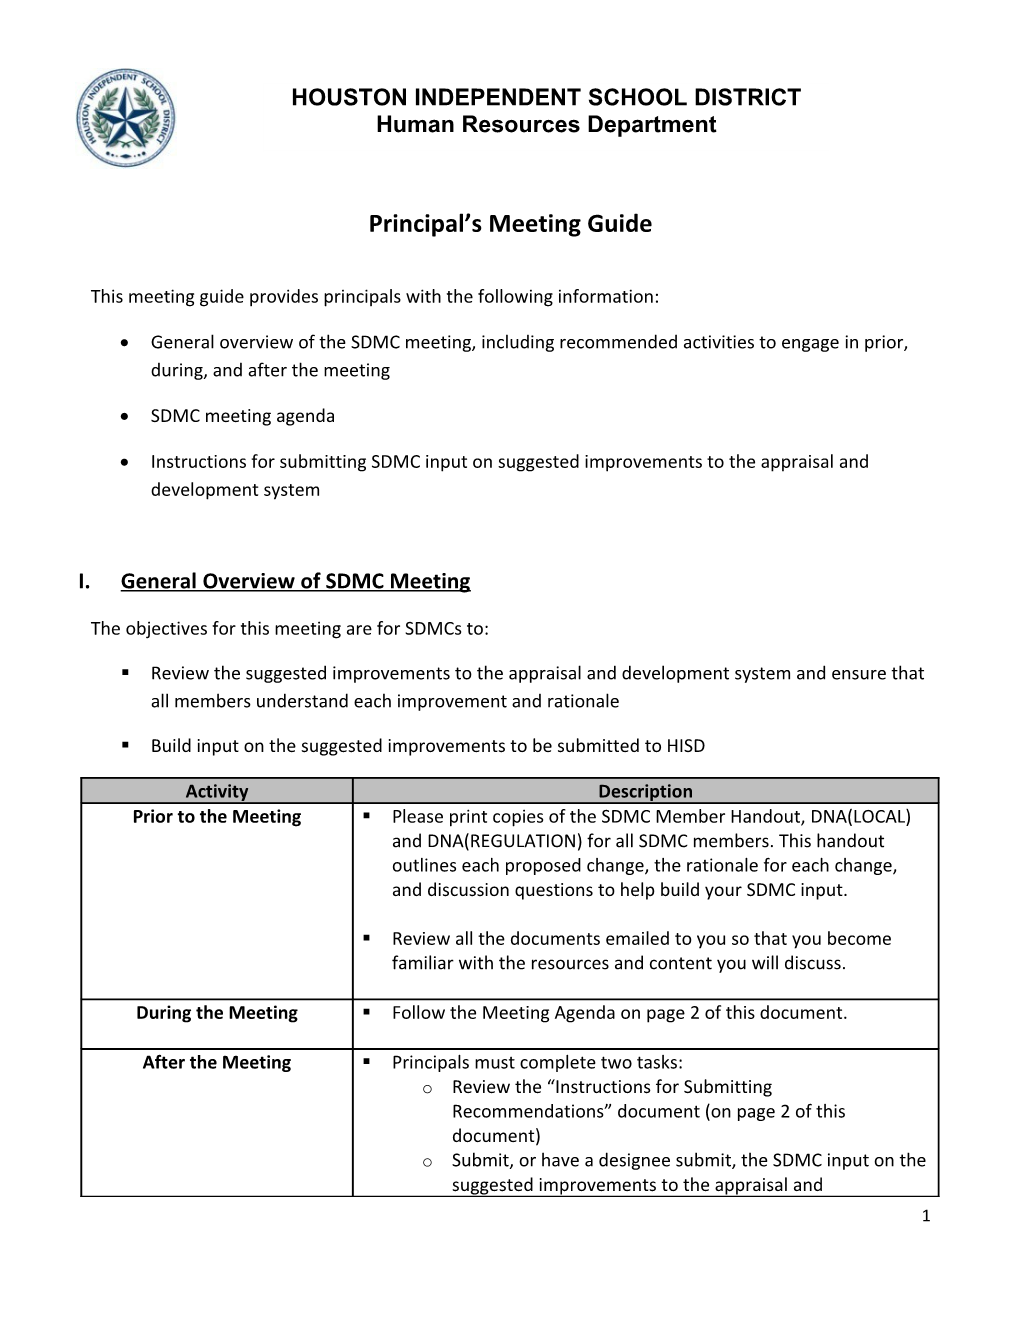 This Meeting Guide Provides Principals with the Following Information